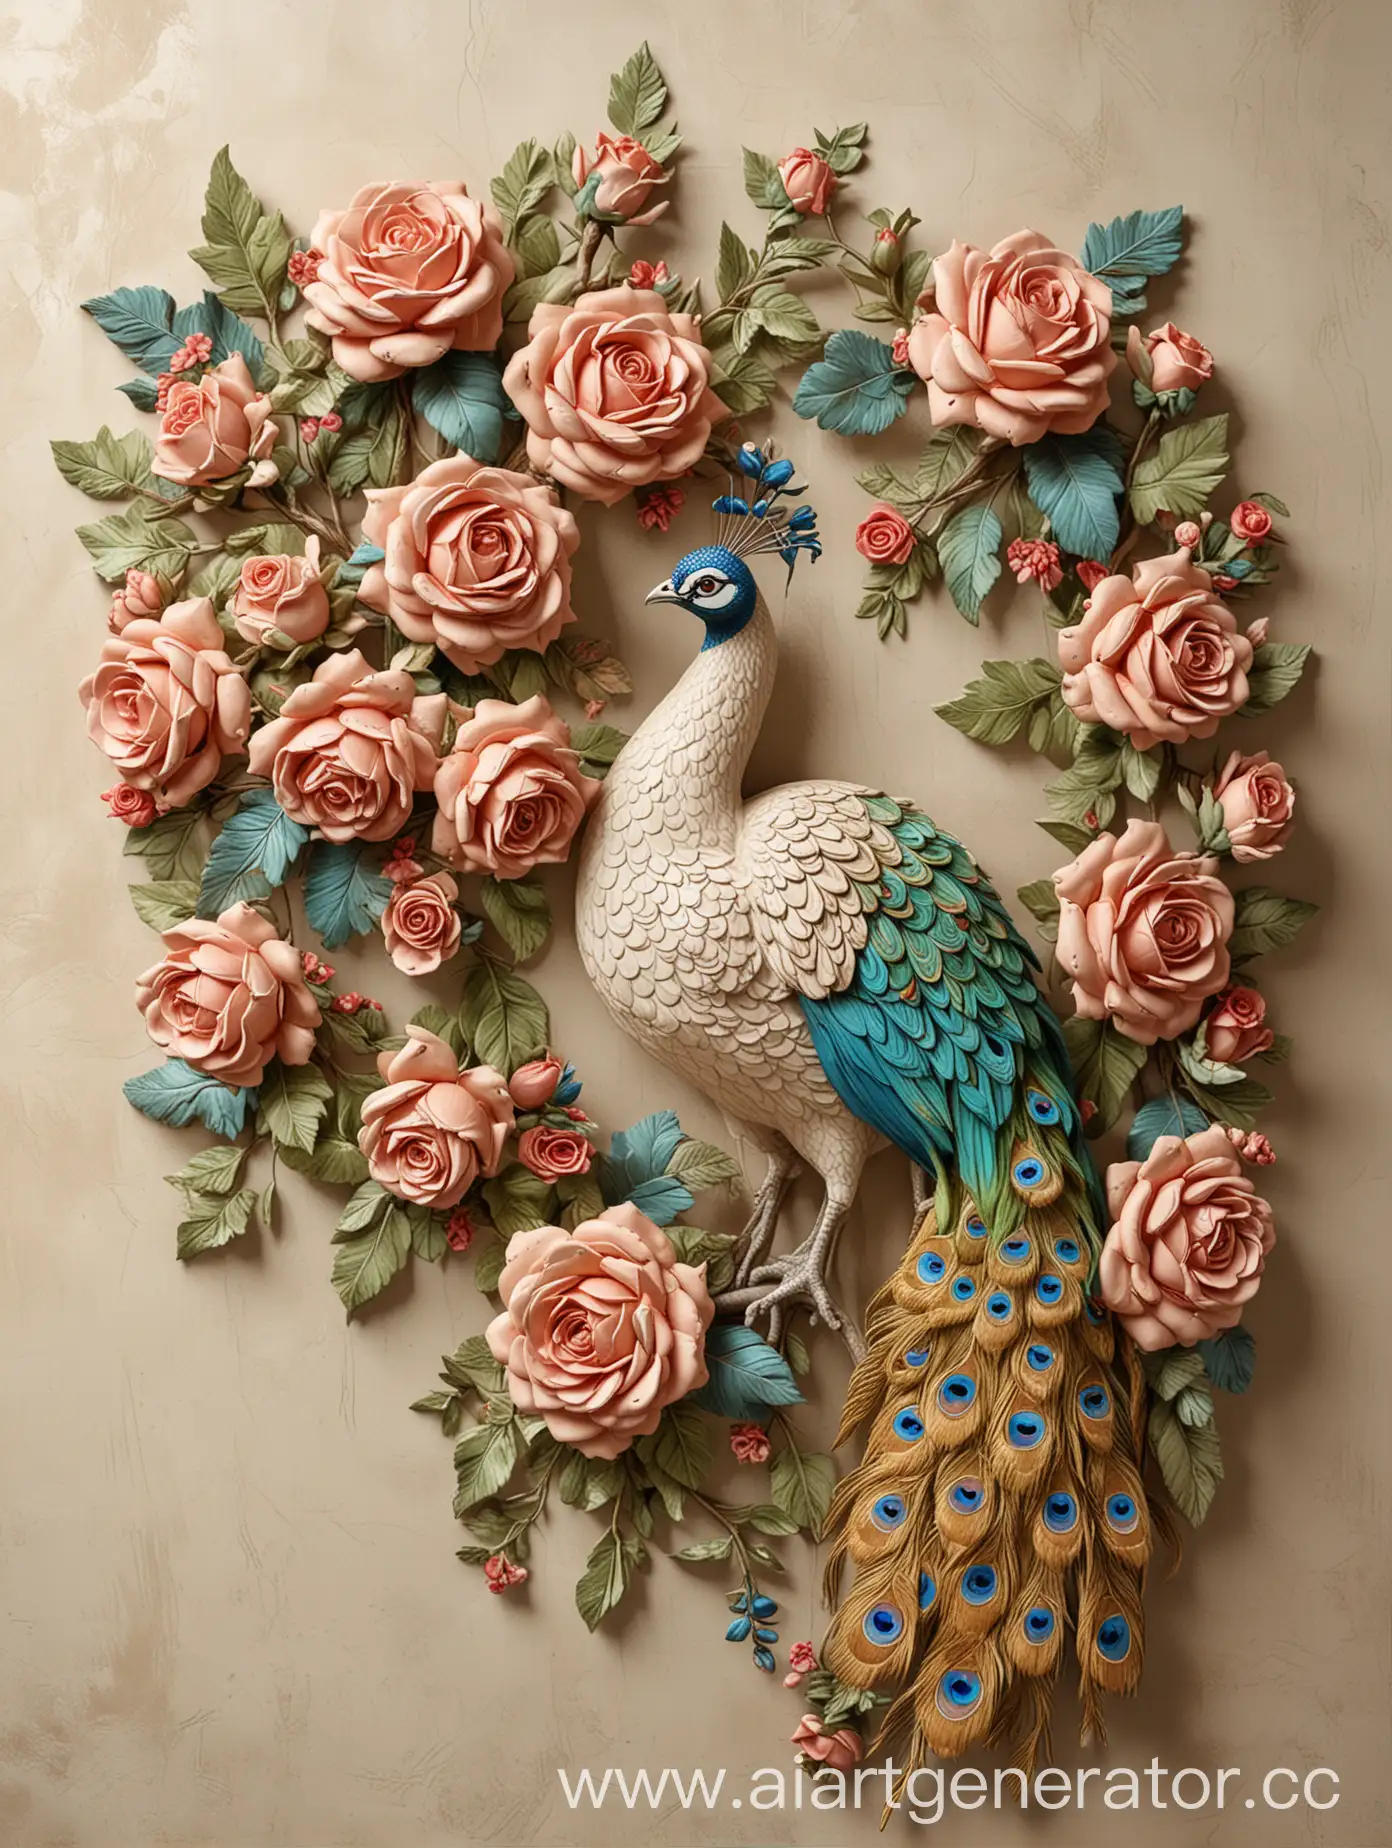 3D-Peacock-and-Roses-in-BasRelief-Stucco-Art